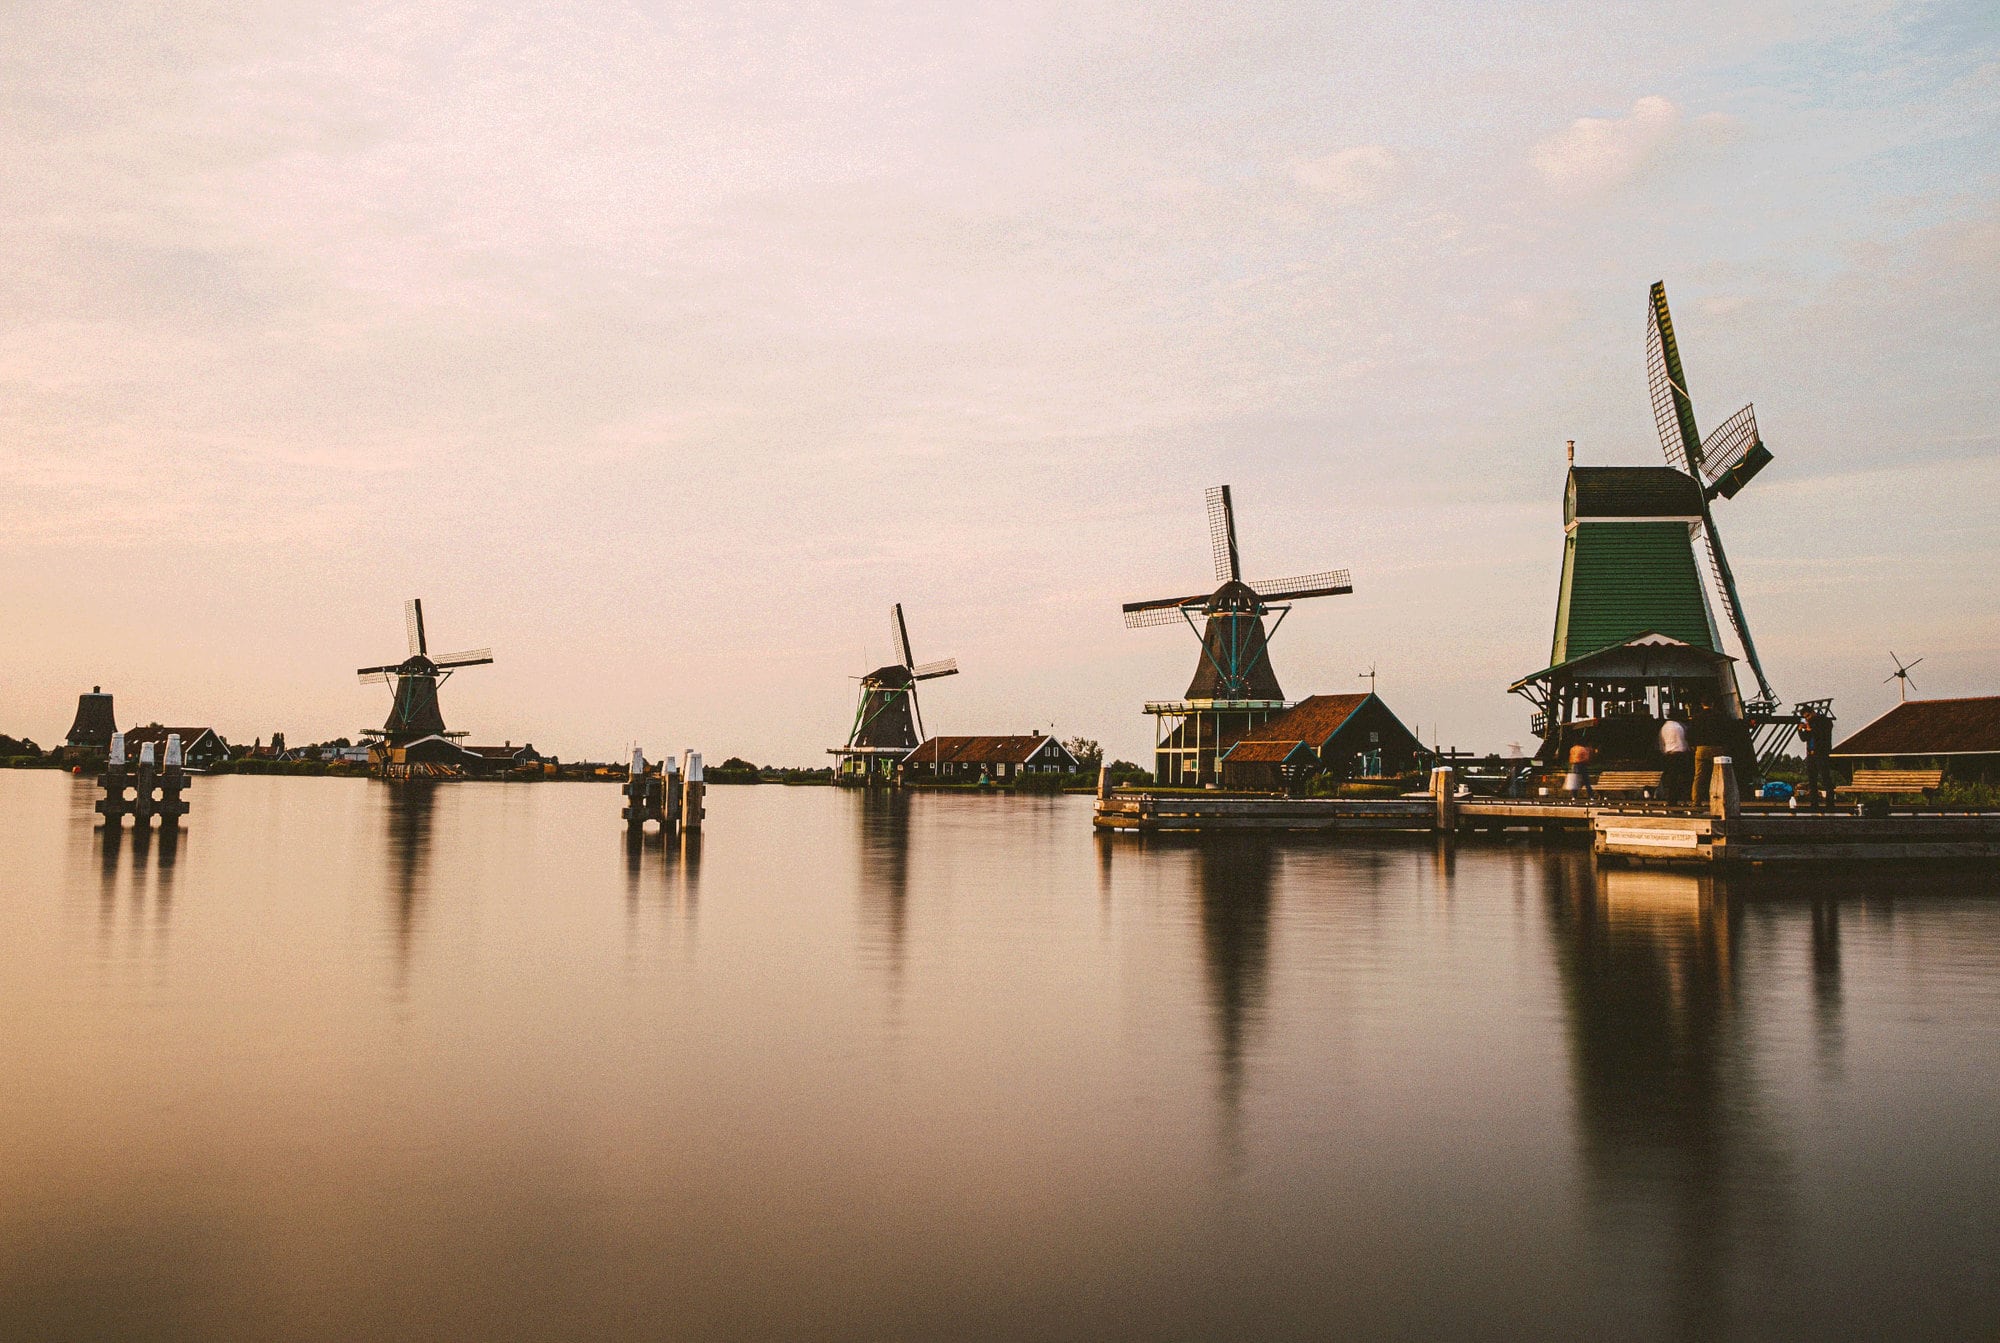 Zaanse Schans Netherlands: Scenic View of Historic Windmills and Traditional Wooden Houses in Dutch Village